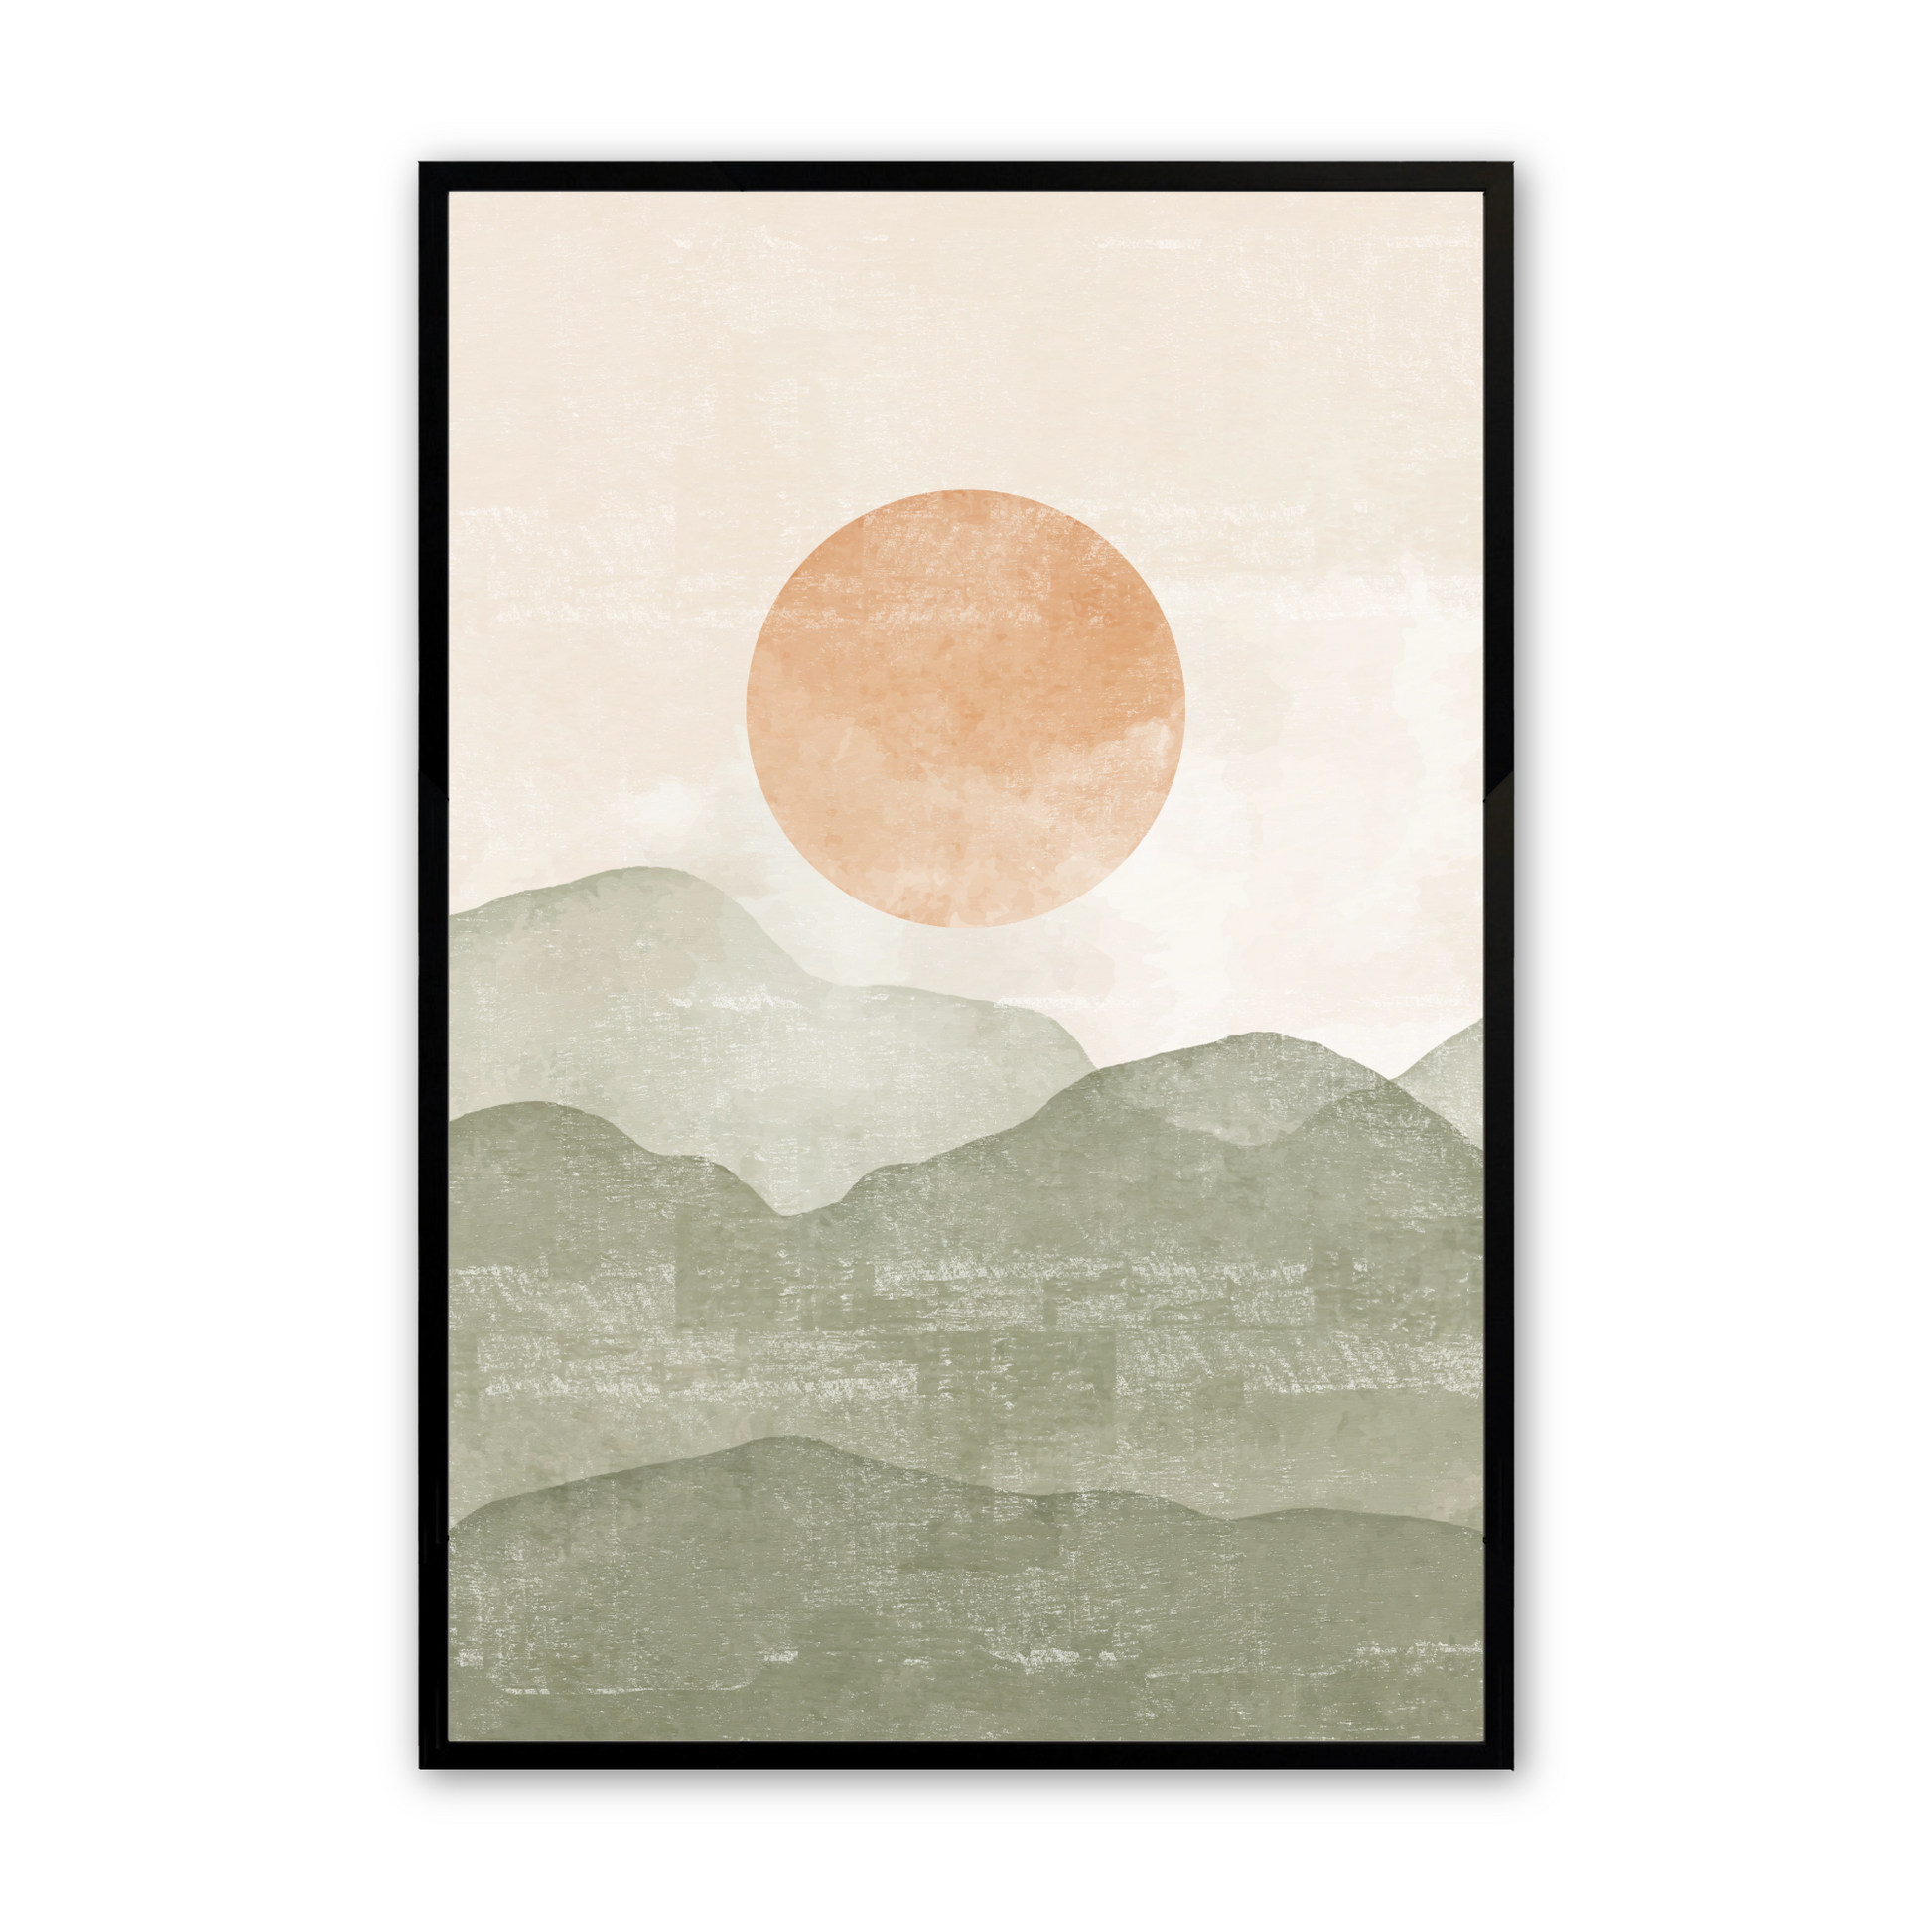 [color:Satin Black], Picture of the third of 3 mountain illustrations in a black frame